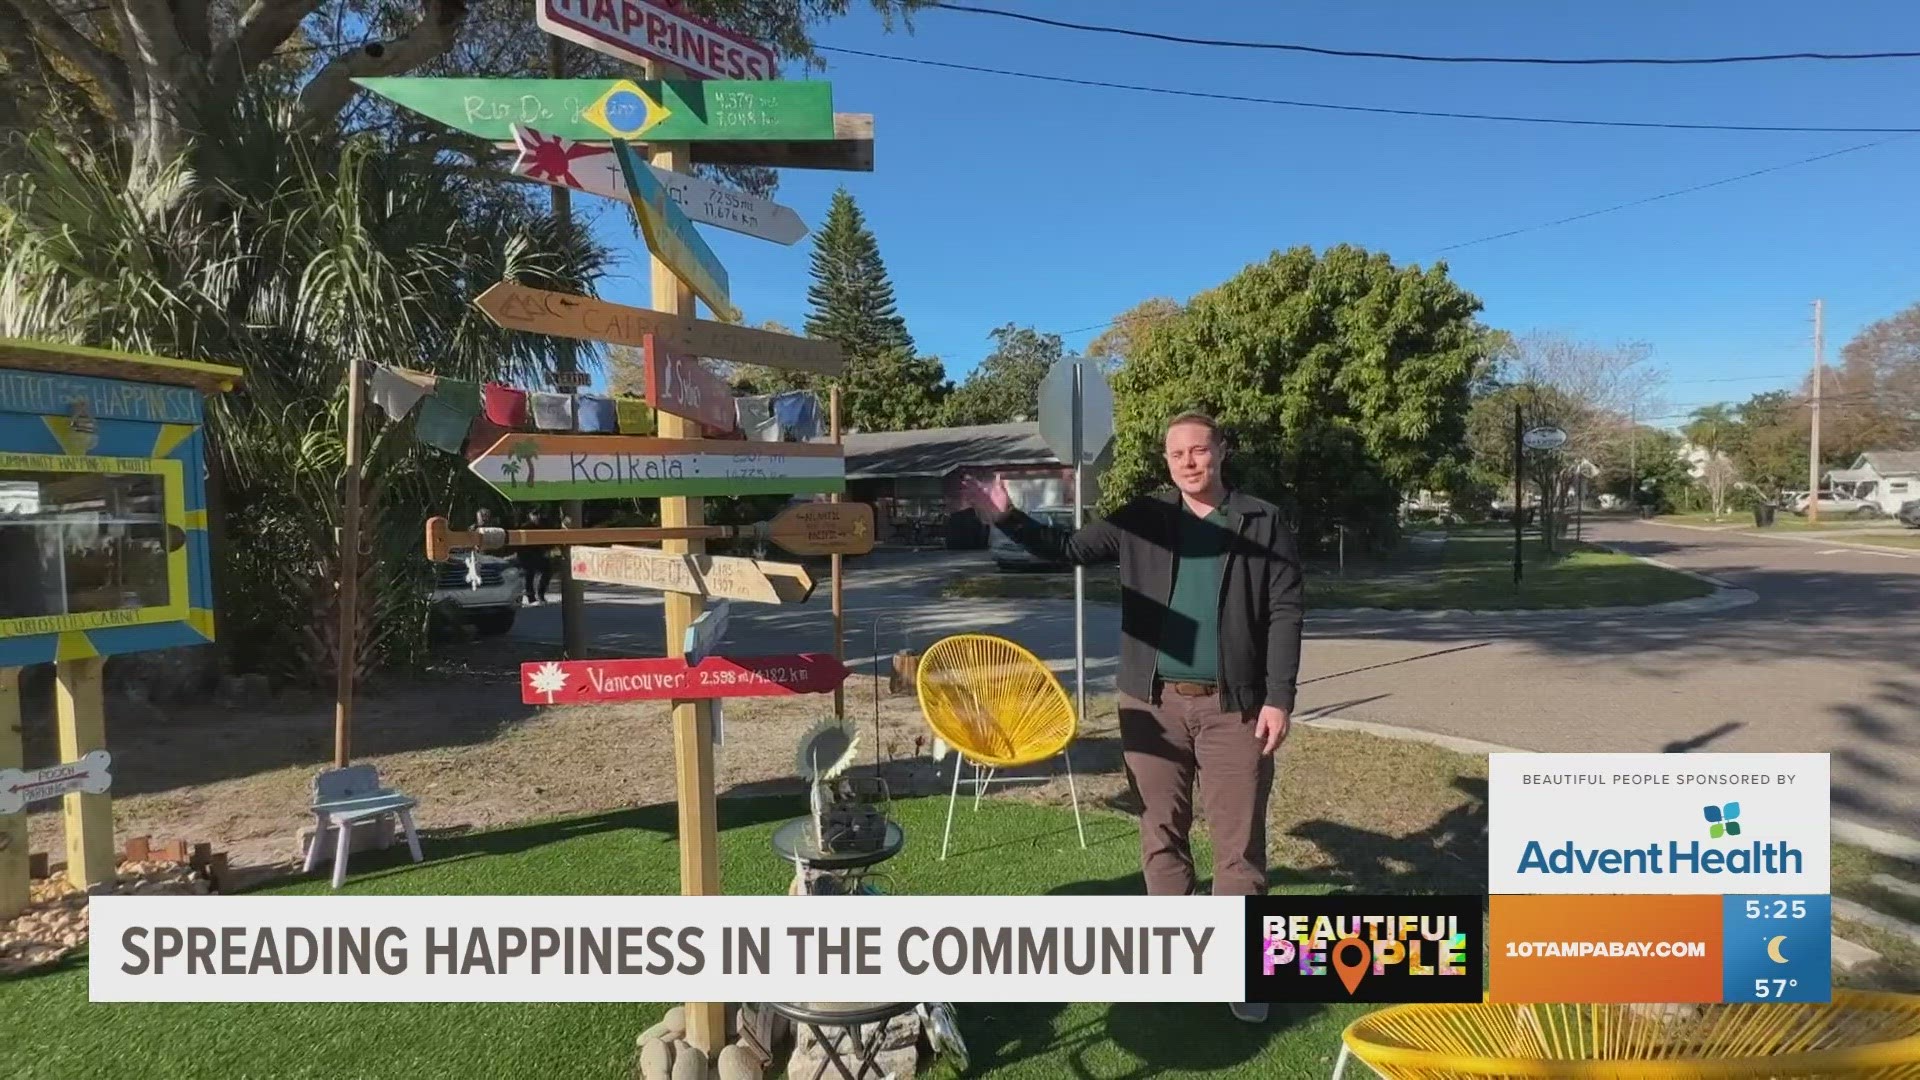 Adam Peters got the idea for his 'Community Happiness Project' during the COVID-19 pandemic when neighbors were stuck inside most of the day.